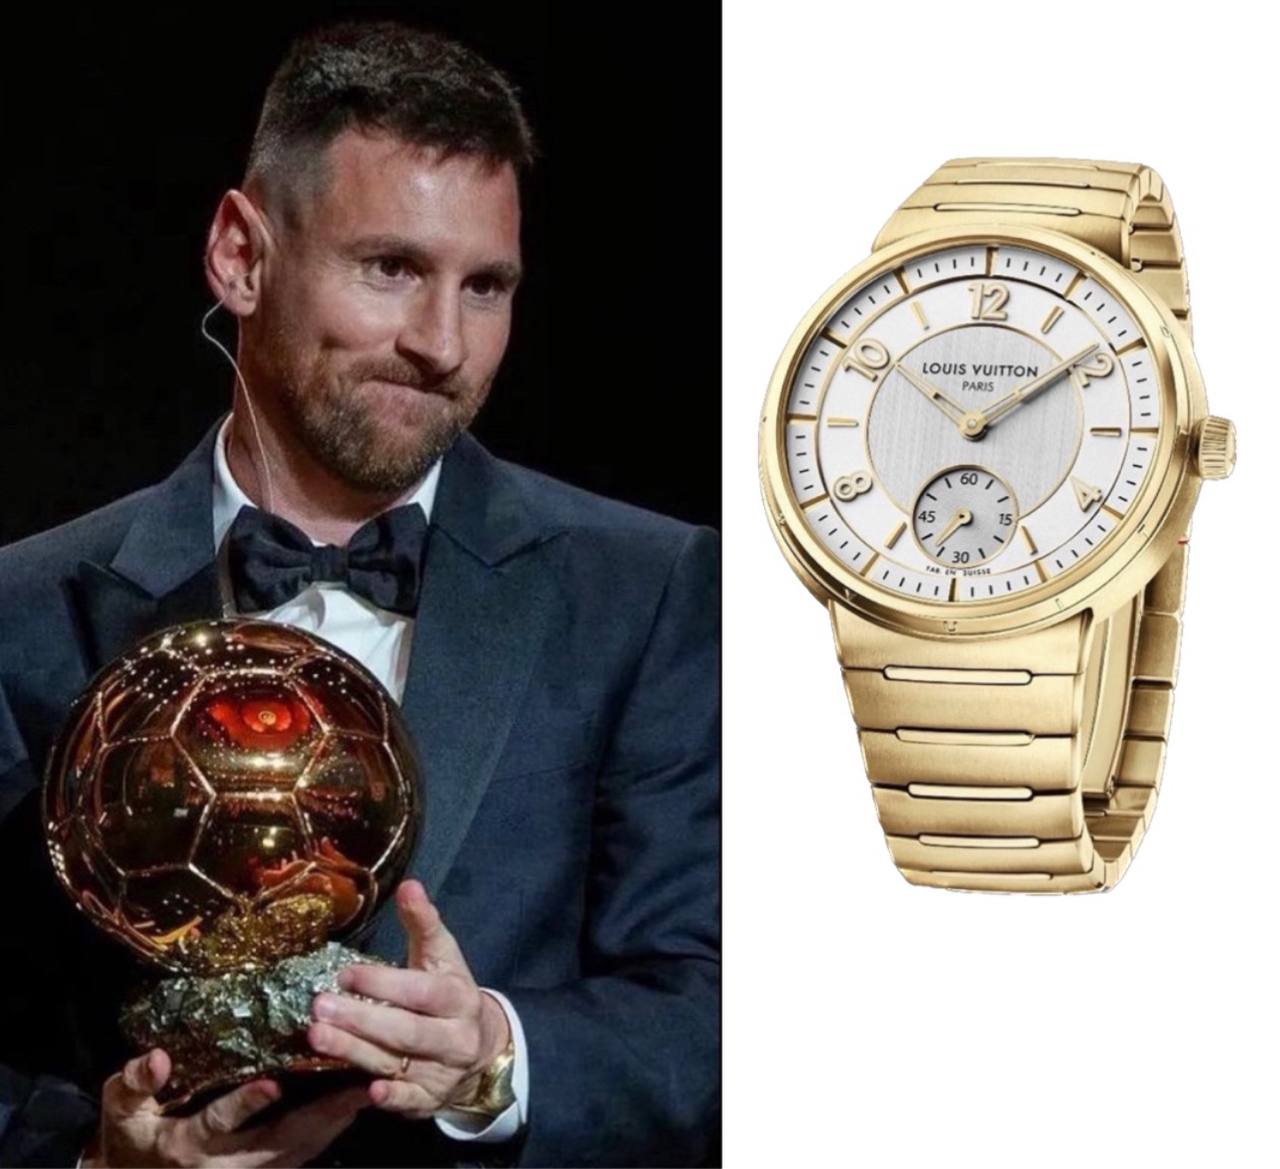 Eight-time Ballon d'Or winner Lionel Messi